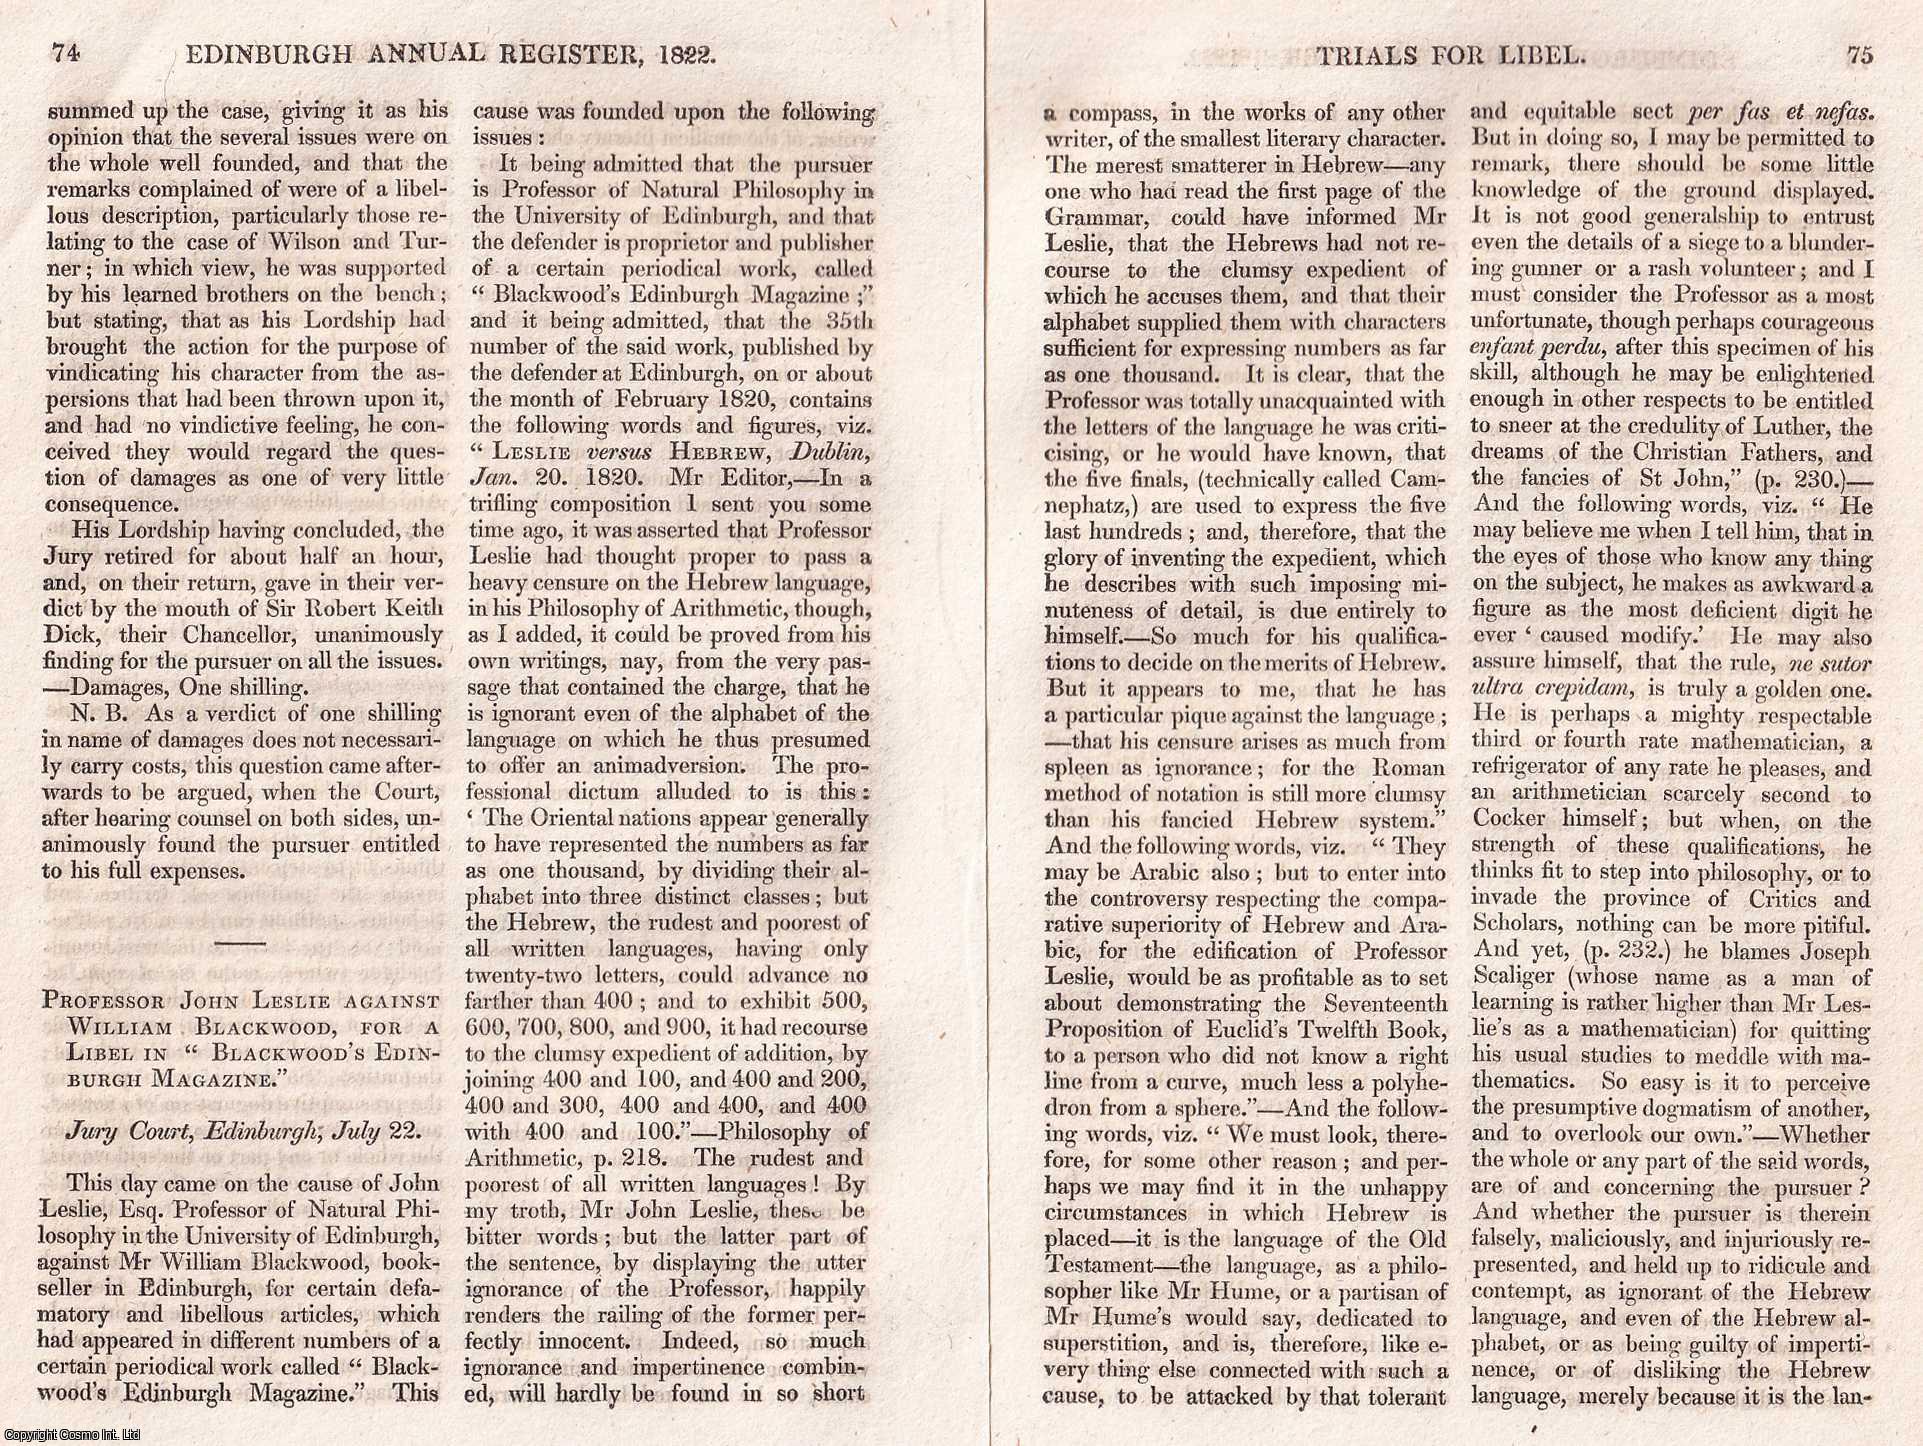 HEBREW LIBEL - Prof. John Leslie against William Blackwood, for a Libel published in Blackwood's Edinburgh Magazine. The dispute centered around Leslie's complex criticism of the Hebrew language in his Philosophy of Arithmetic work. An original article from The Edinburgh Annual Register, 1821.